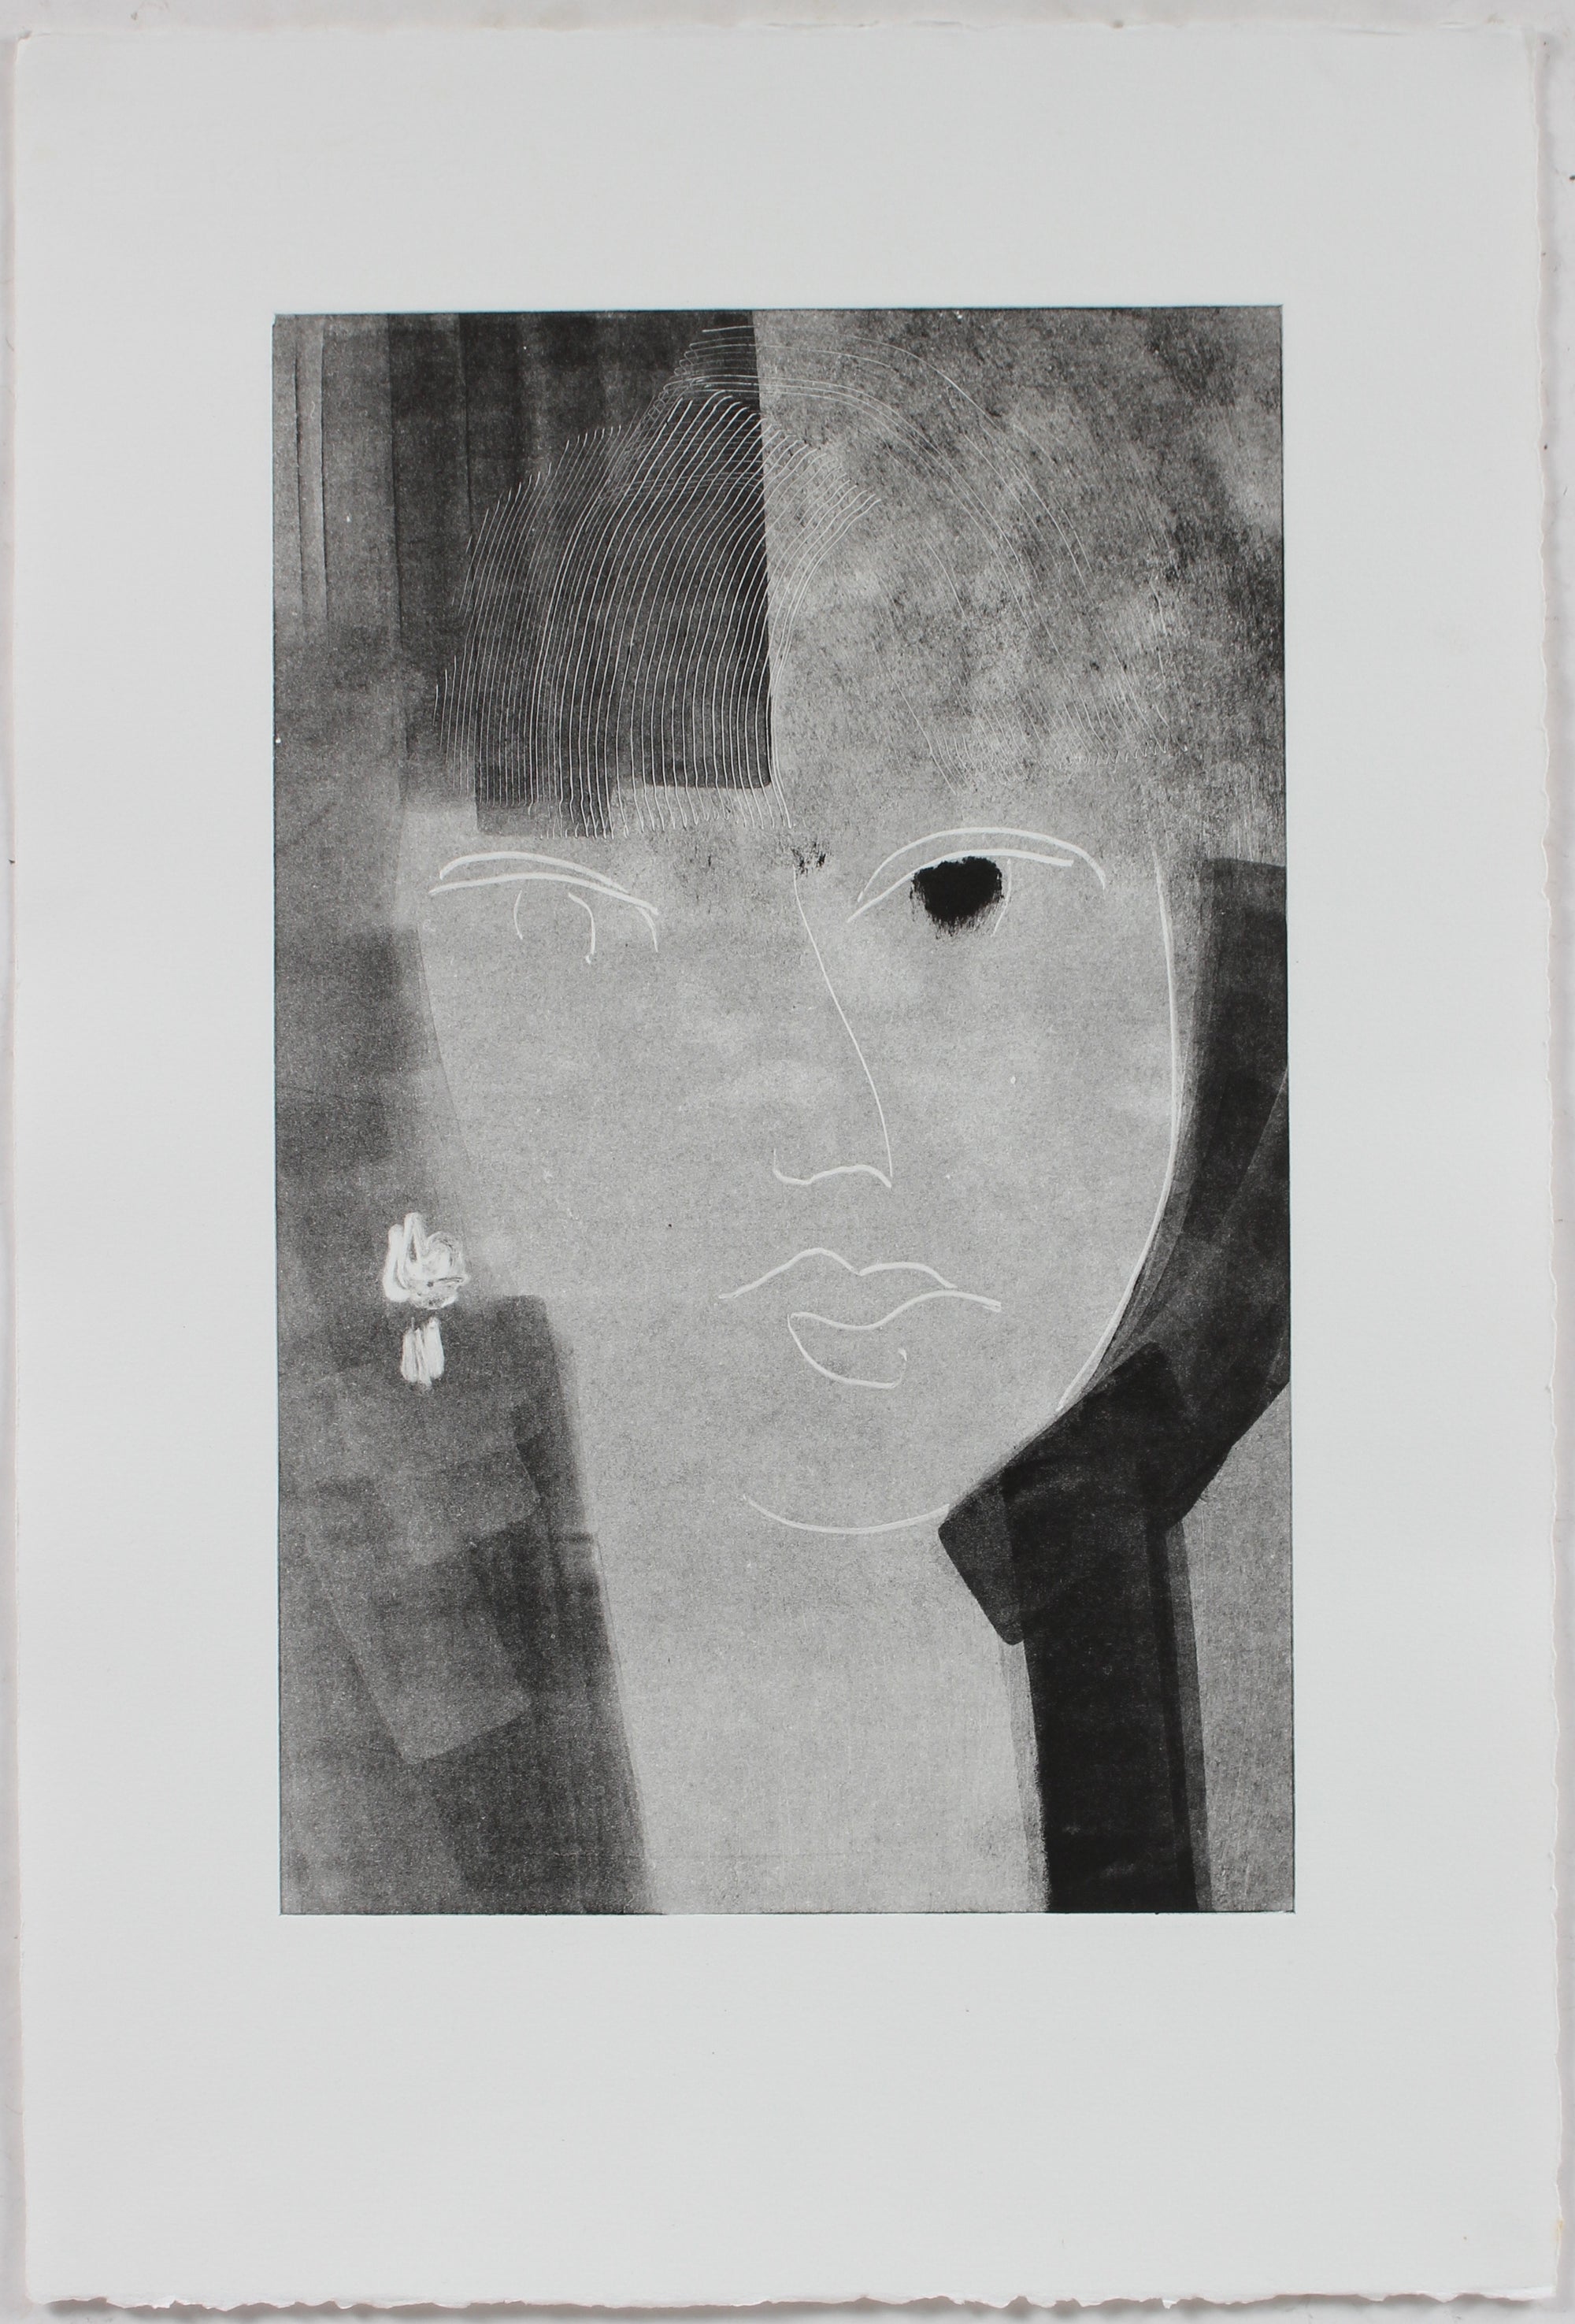 Monochromatic Abstracted Portrait <br>Late 20th Century Etching <br><br>#96439